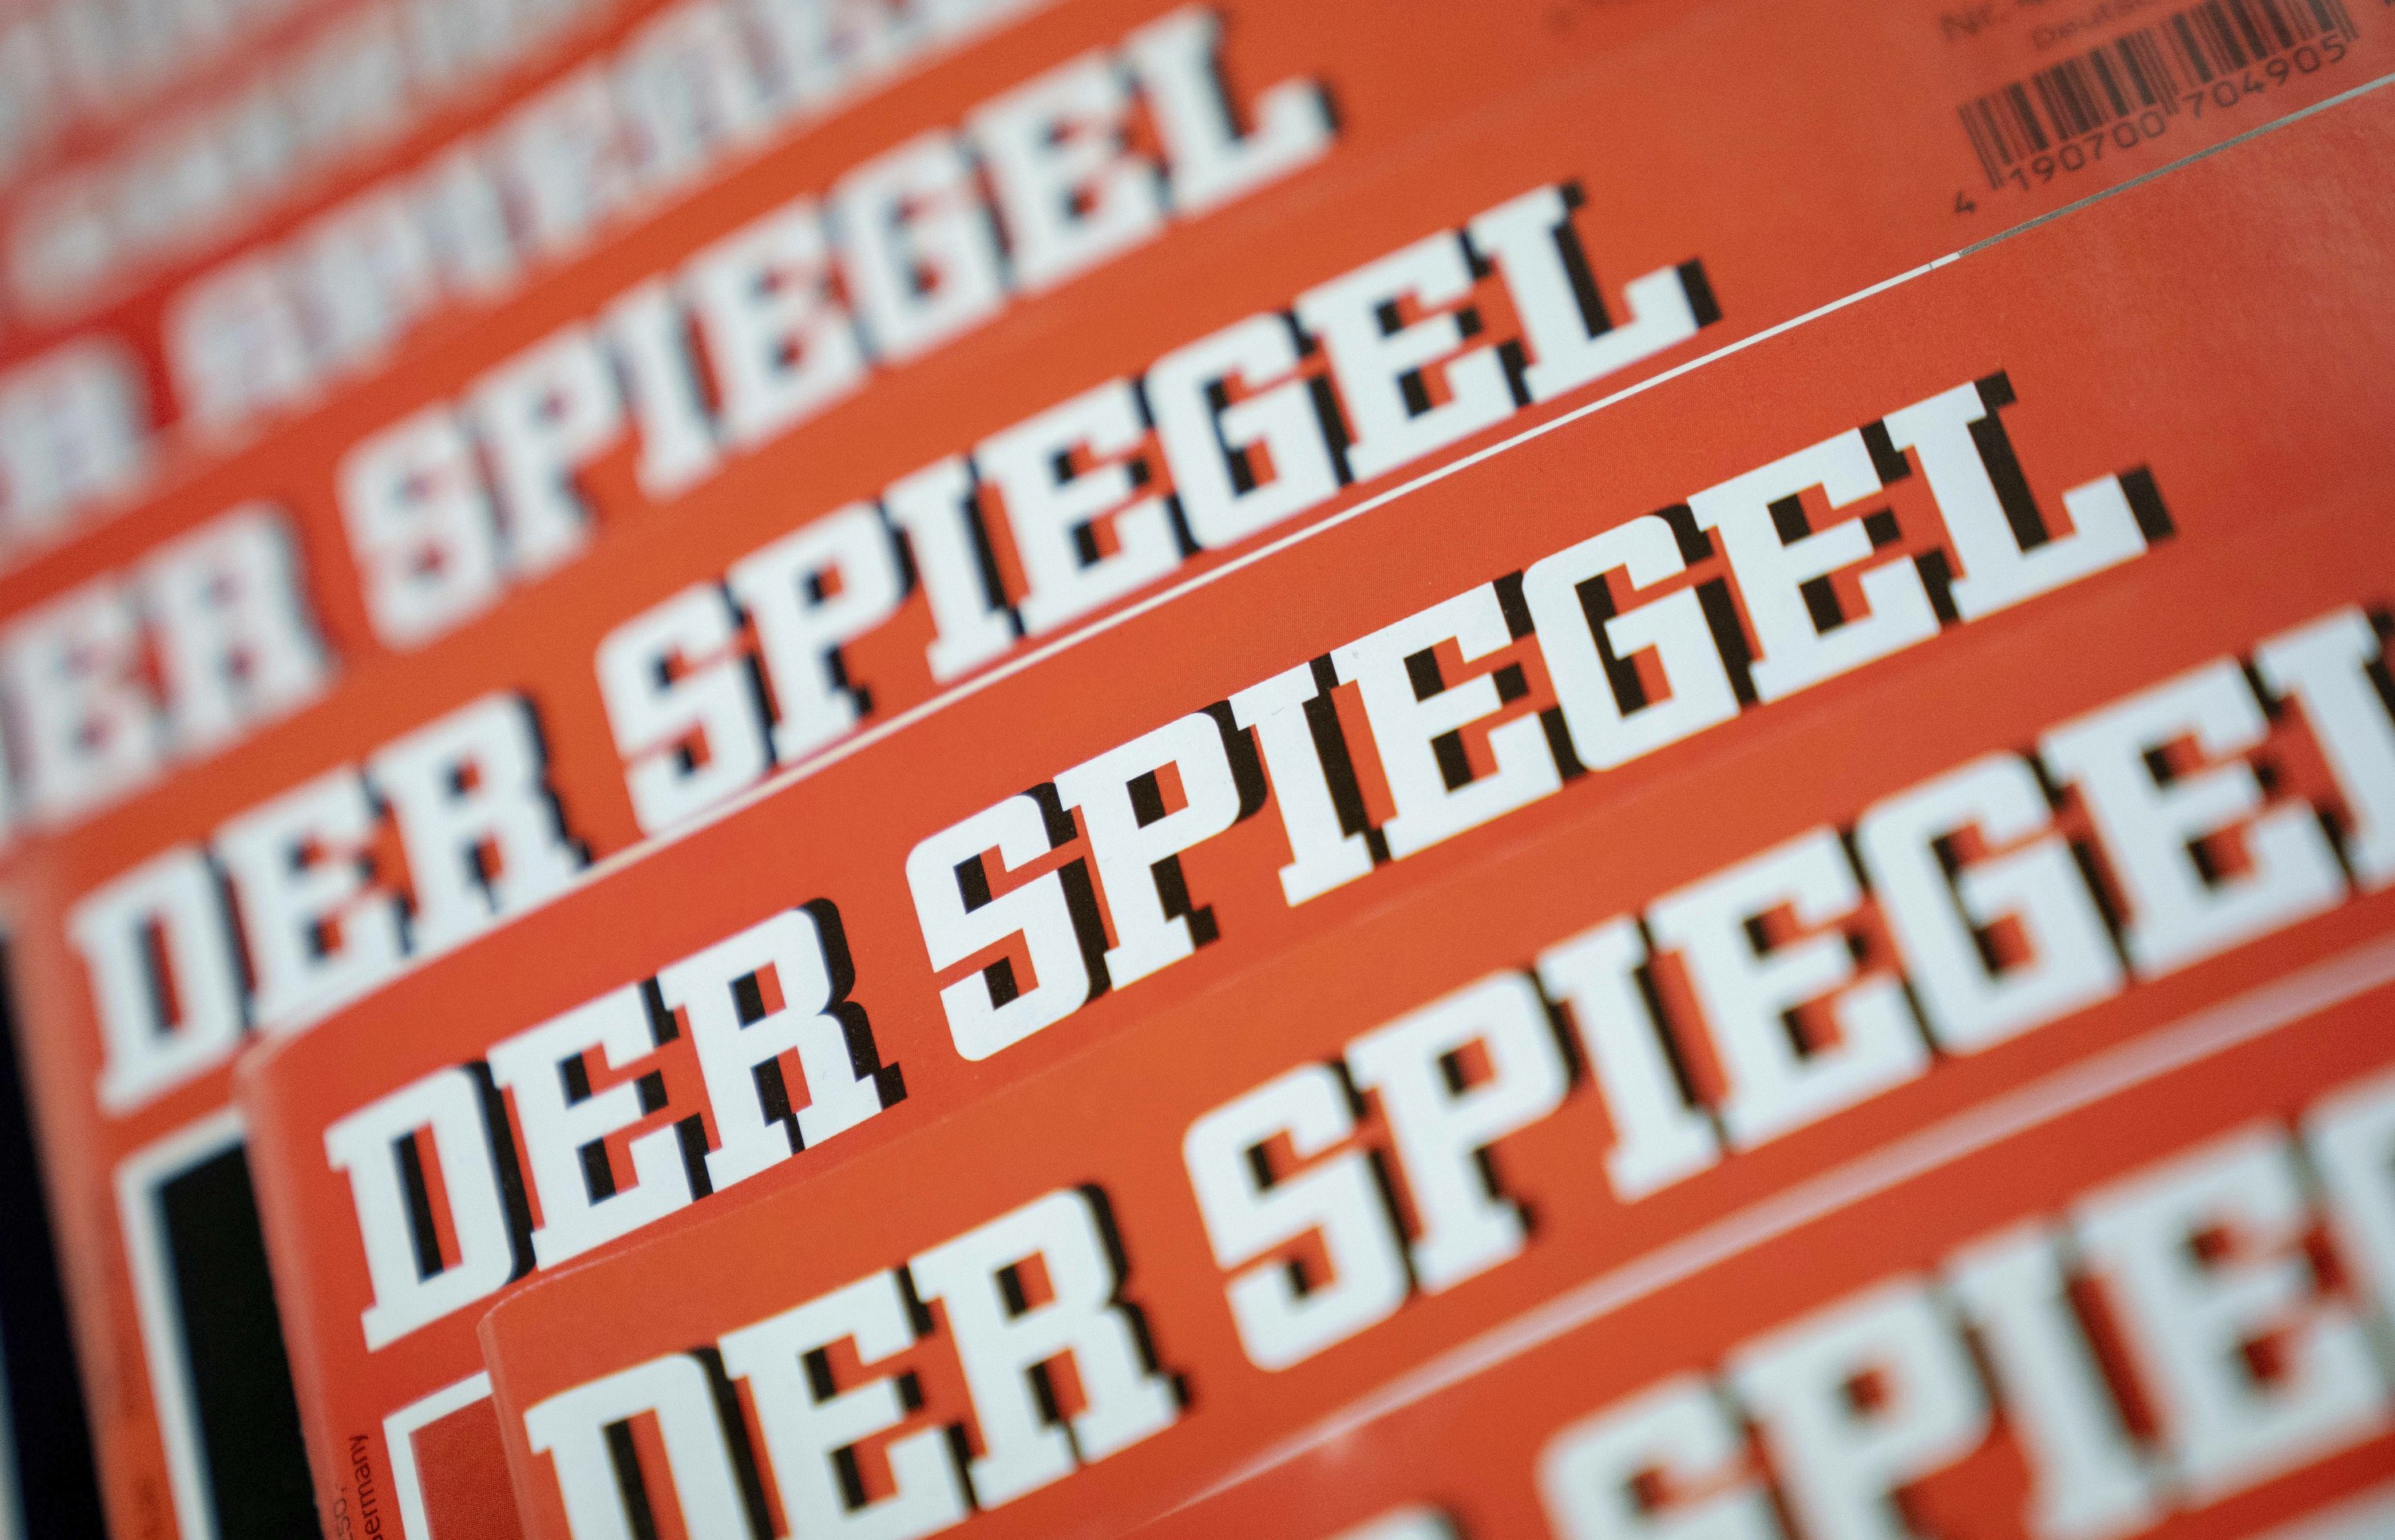 Janice Durven Nauwgezet Germany: Der Spiegel says star reporter made up material | AP News